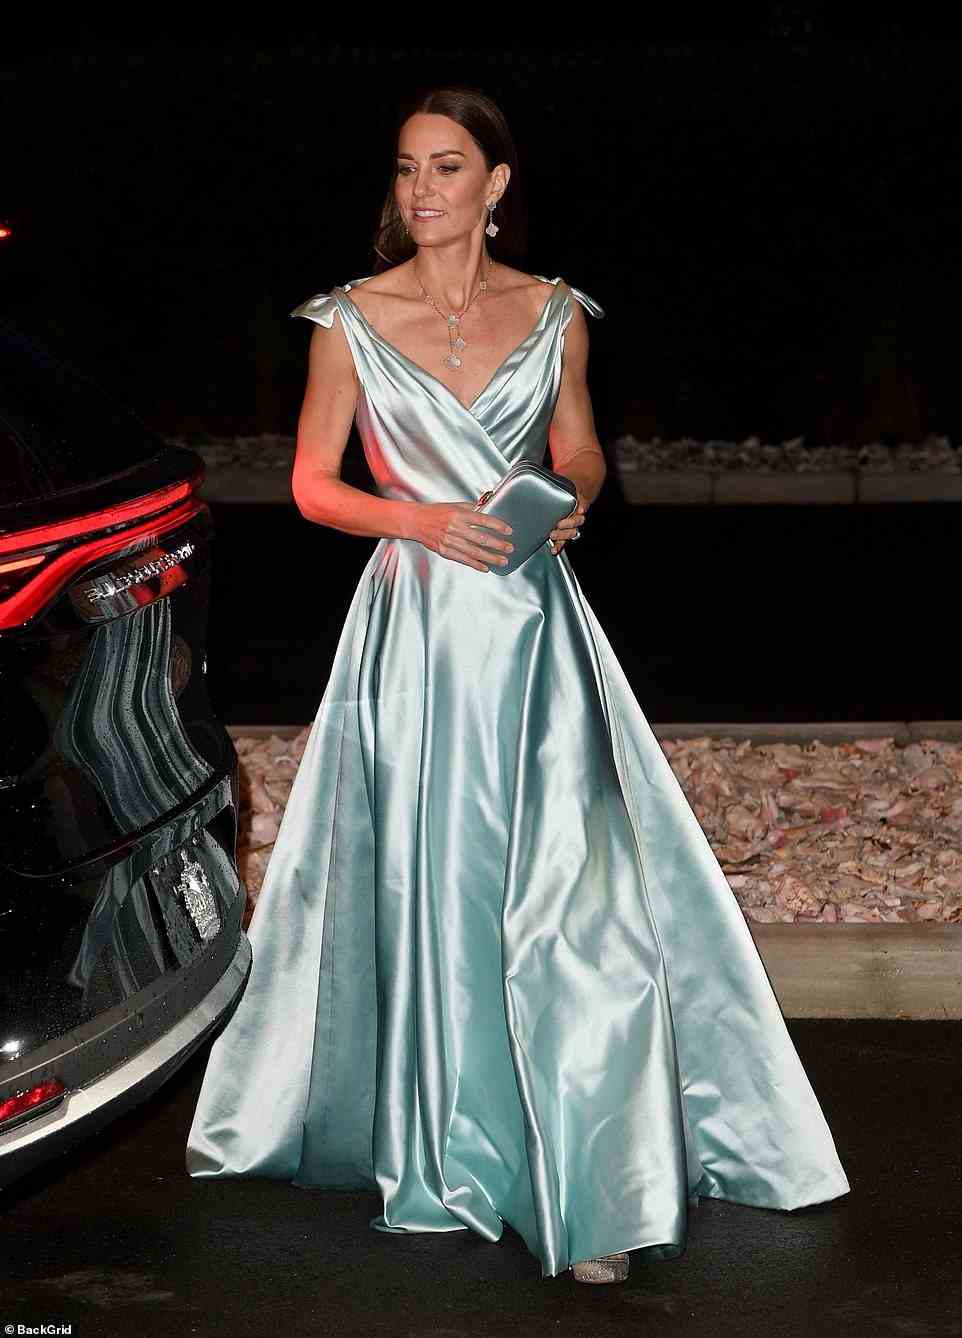 The floor-length icy blue gown is by British designer Phillipa Lepley, who is London’s go-to couturier for stylish dresses